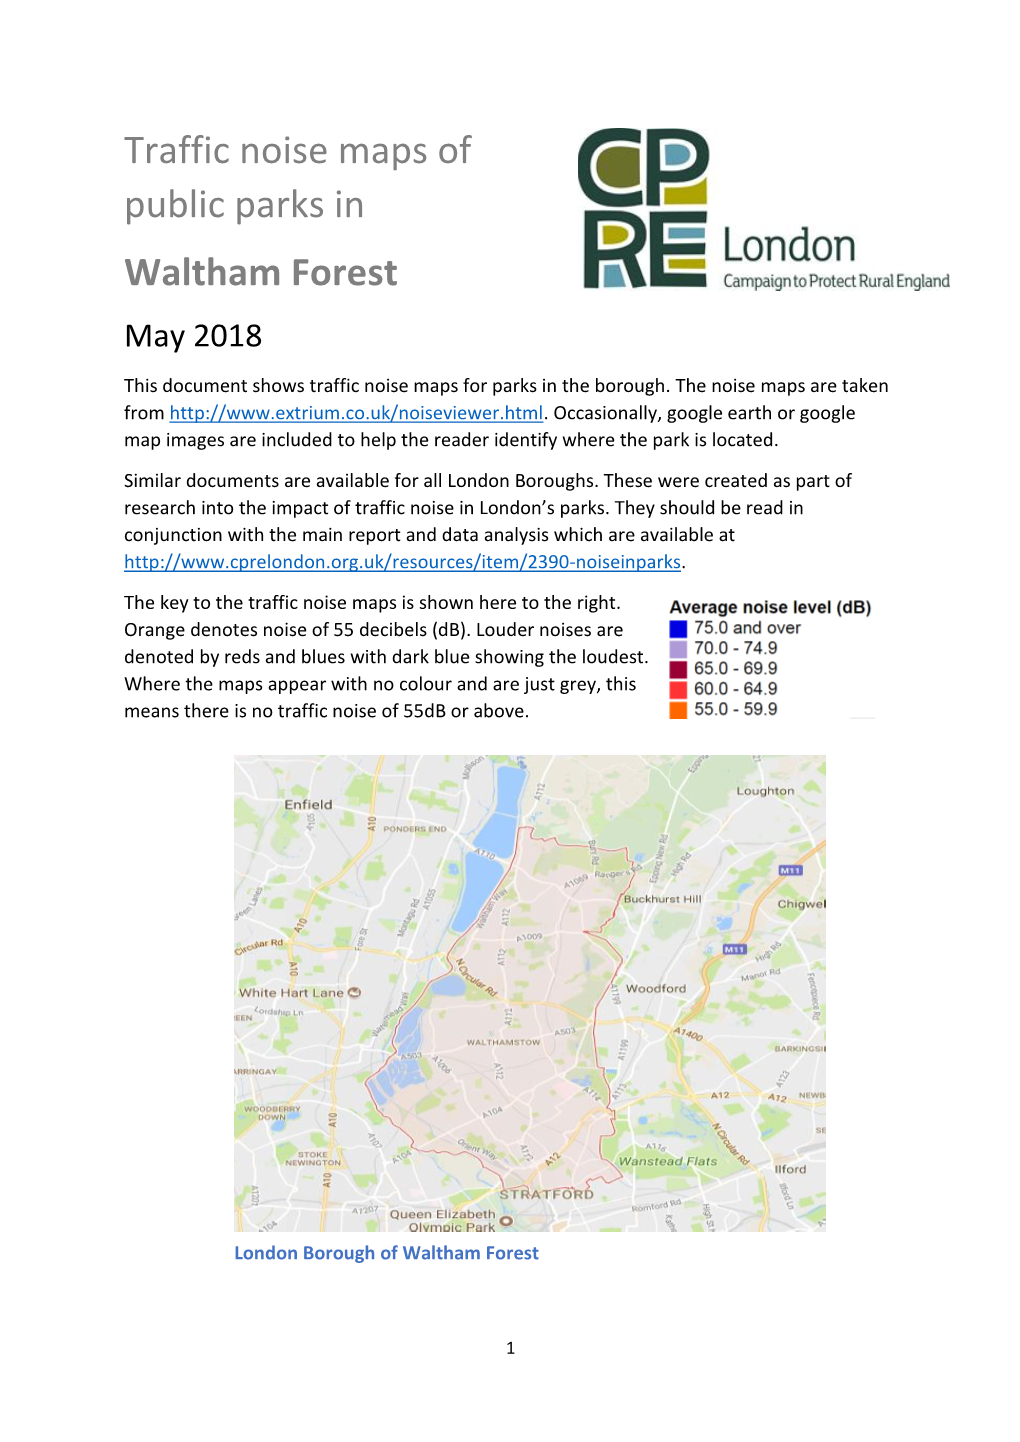 Traffic Noise Maps of Public Parks in Waltham Forest May 2018